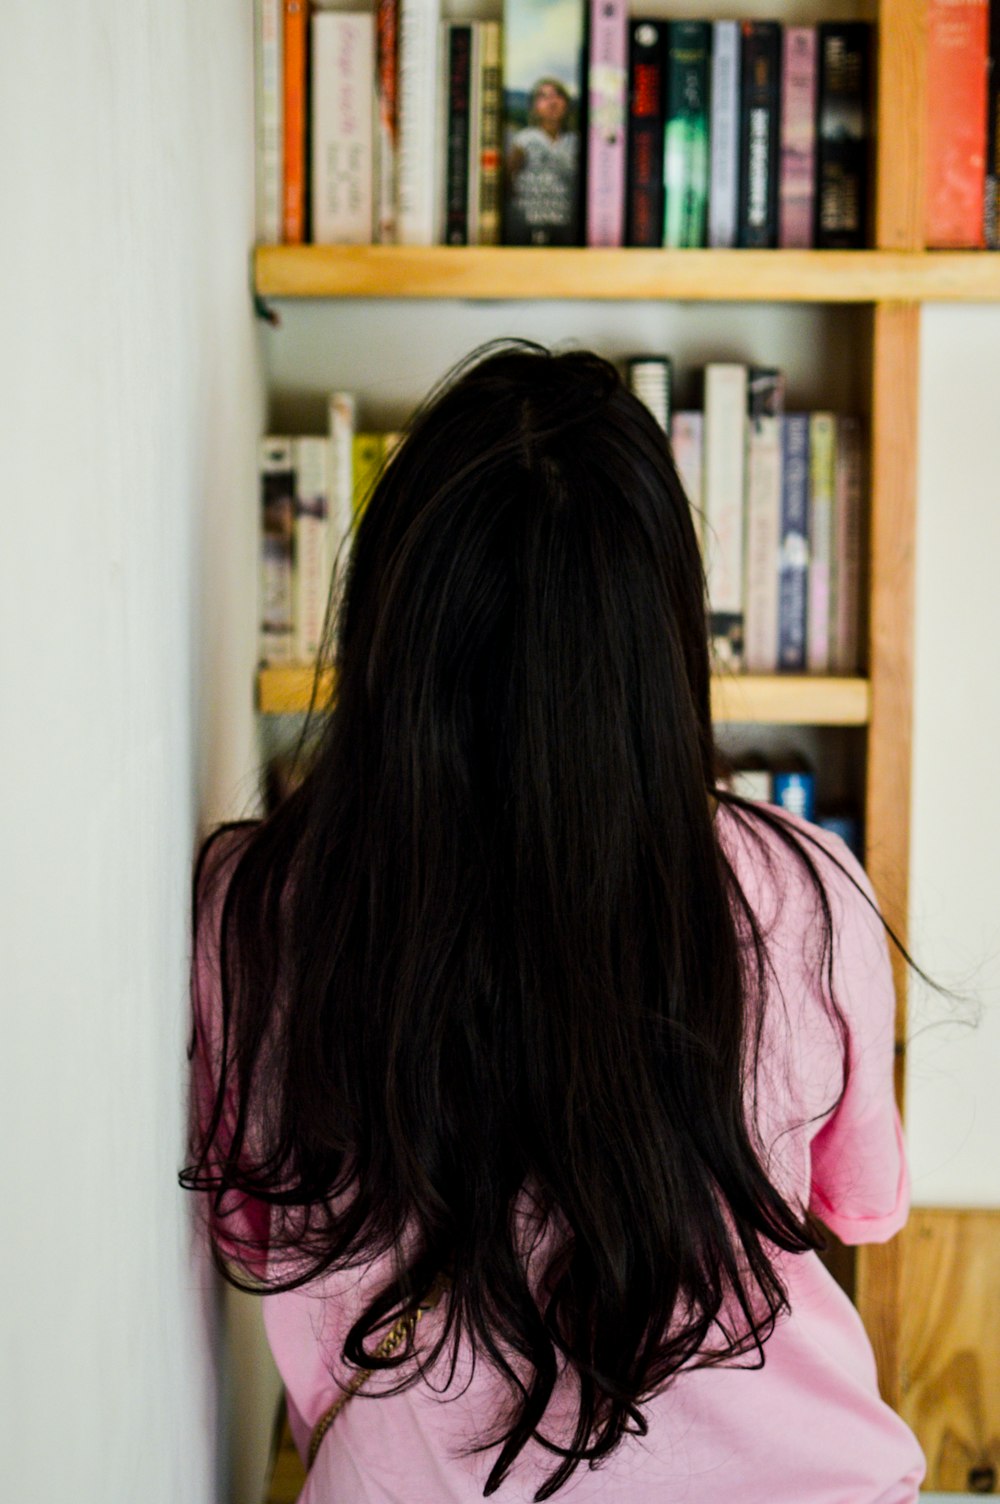 woman leaning on wall looking at bookshelf